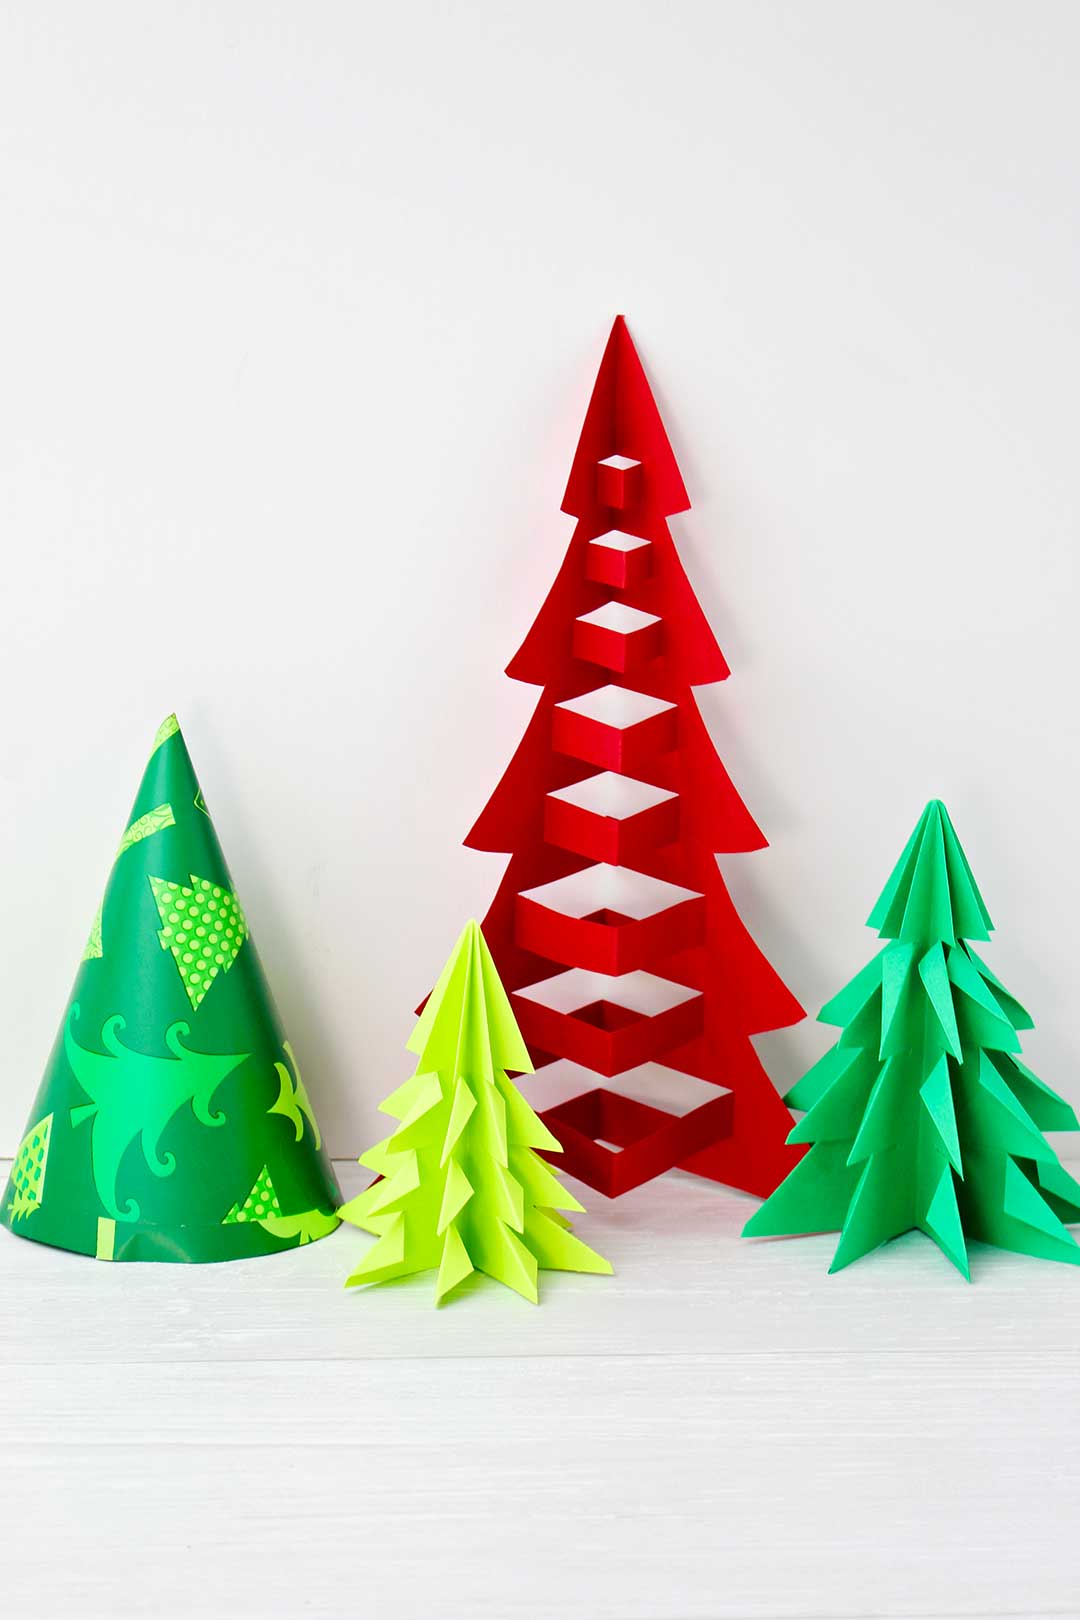 GIFT WRAPPING, CHRISTMAS GIFT BOX WRAPPING with CHRTISTMAS TREE ORIGAMI  DECORATION